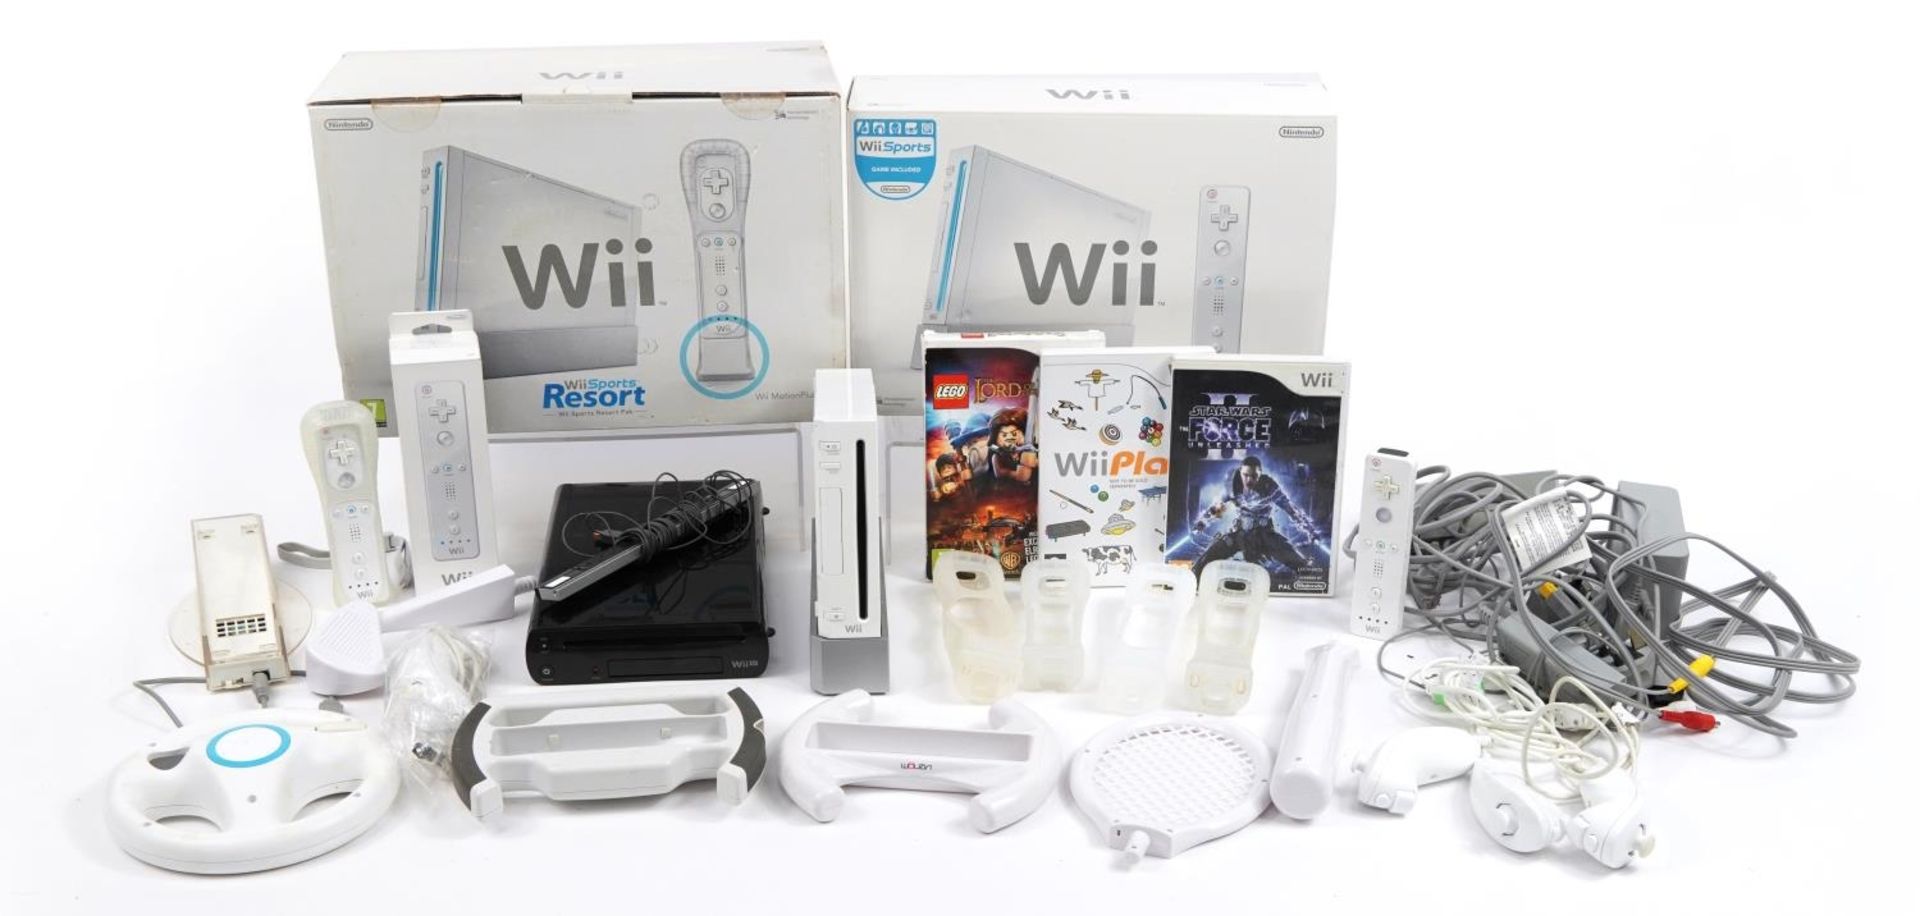 Two Nintendo Wii games consoles with controllers, accessories and games